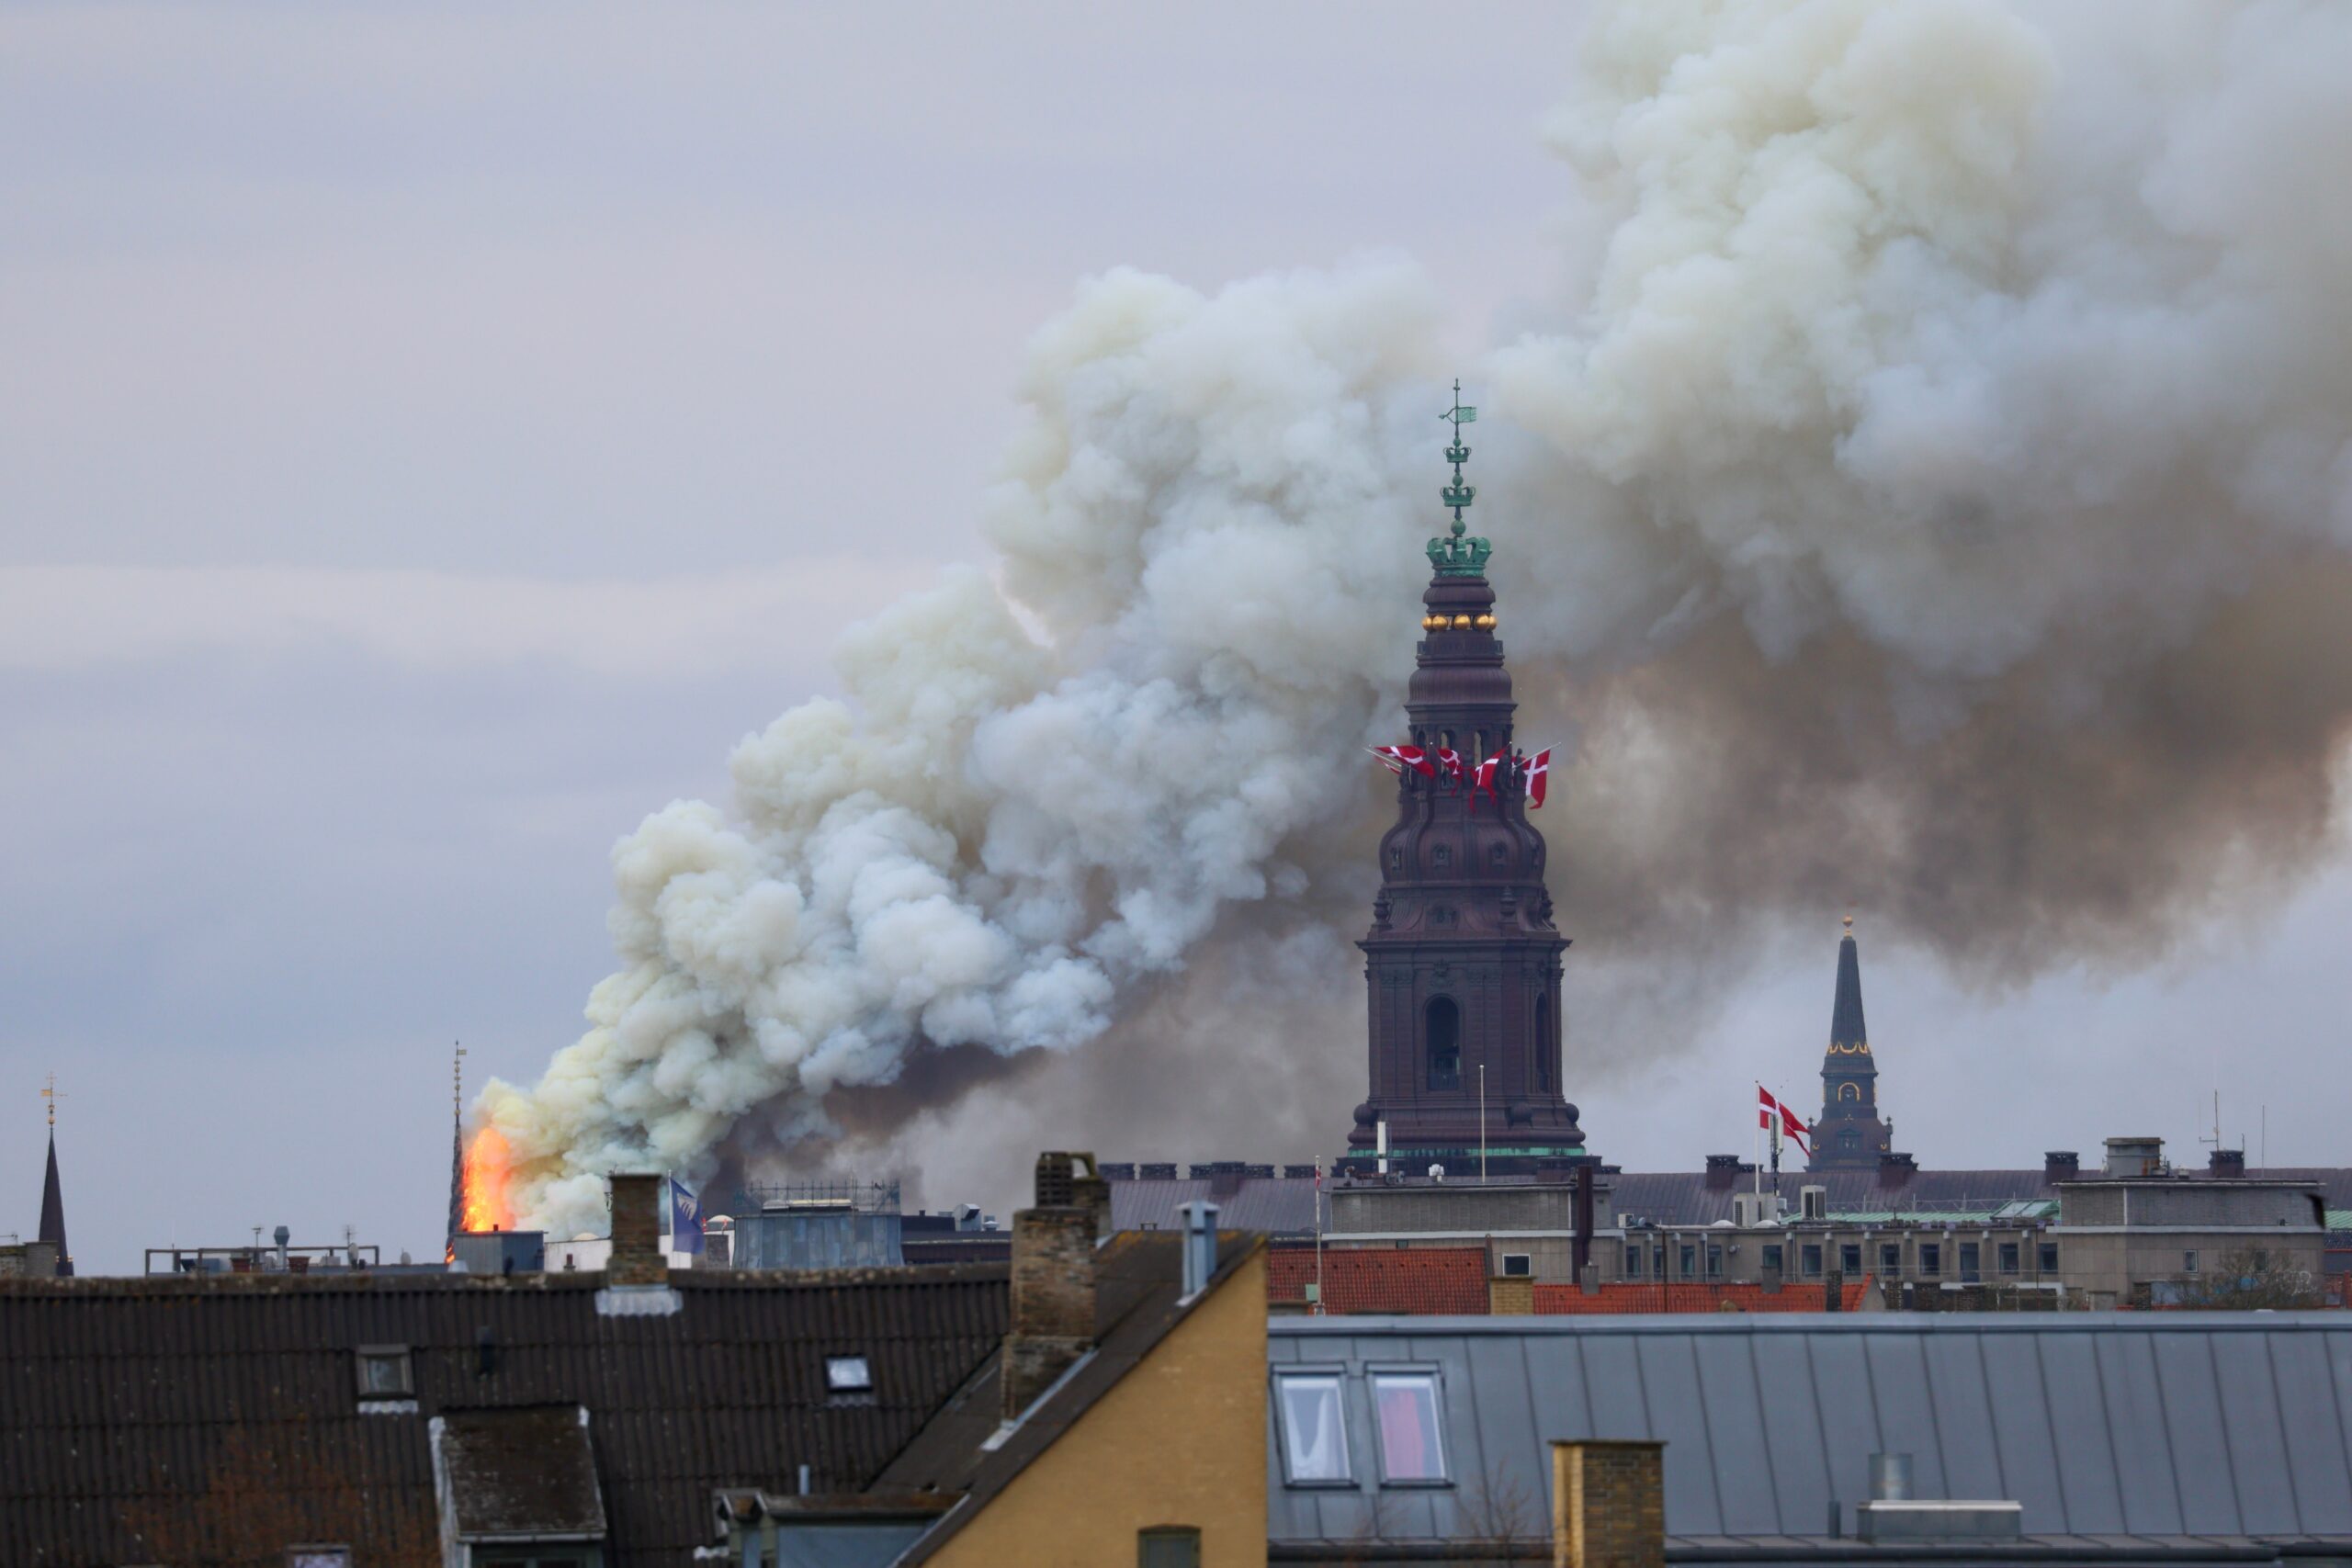 Denmark lacks fire safety guidelines for renovation and conversion works